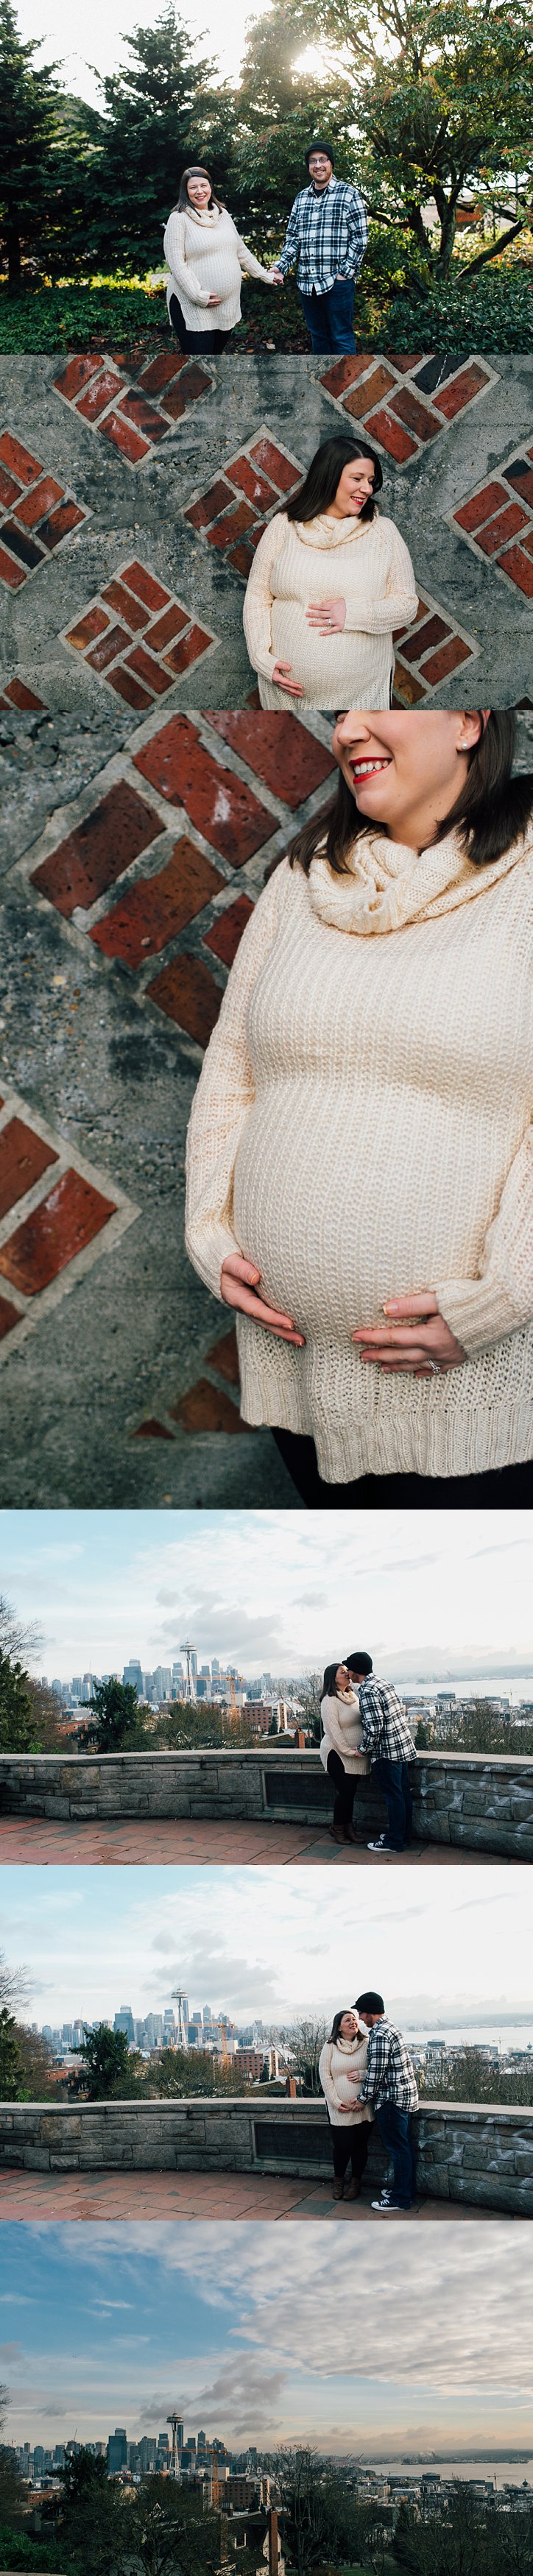 seattle maternity photographer lifestyle PNW space needle maternity queen anne-2.jpg